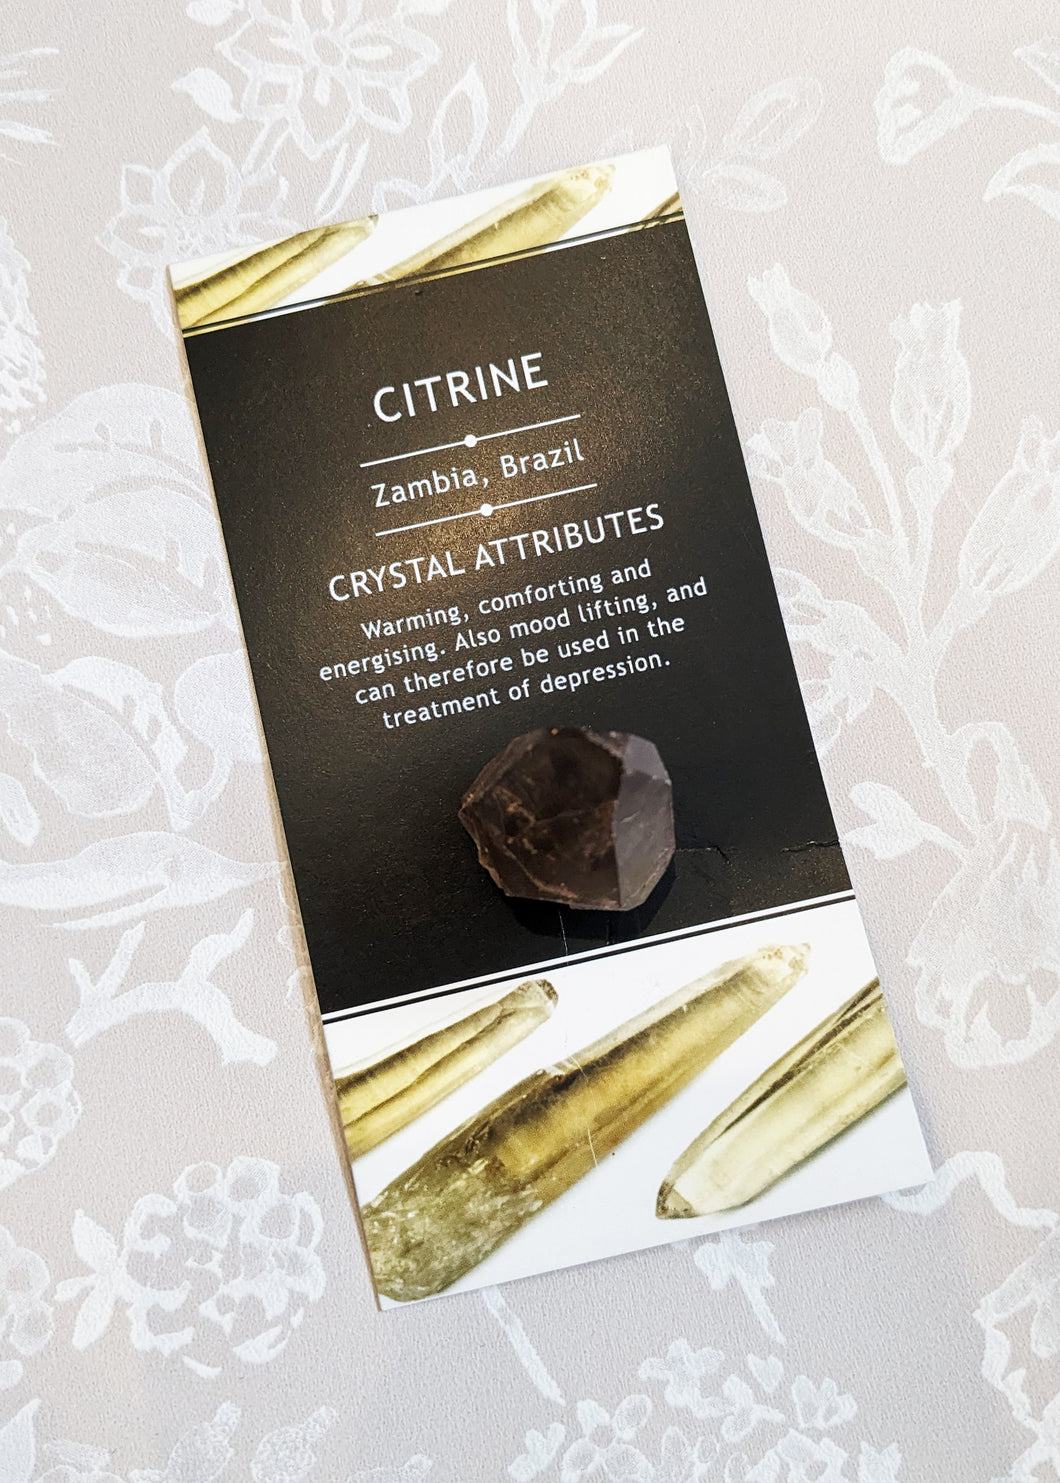 Raw Citrine Crystal - For Mood Lifting and Anti-Depression